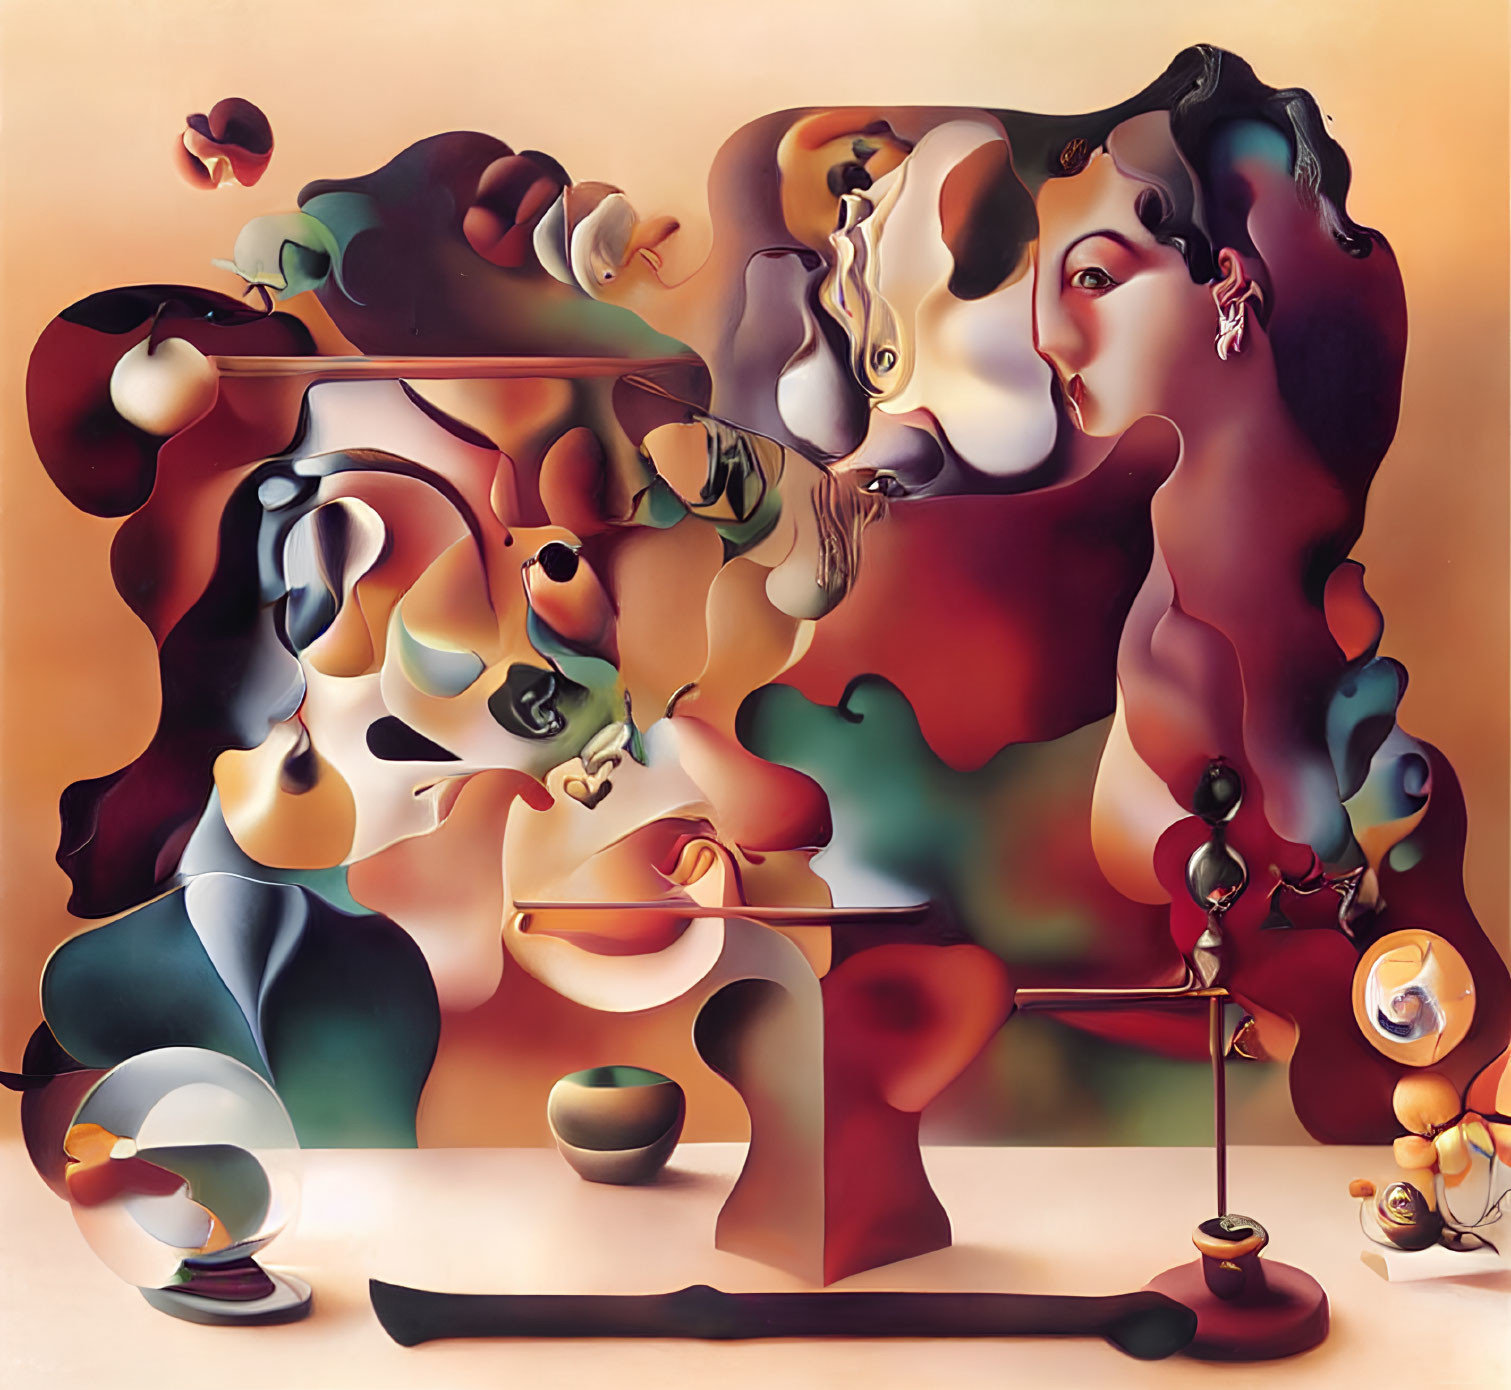 Abstract surreal painting: Two faces merging with vivid colors and abstract shapes, featuring dream-like scene with table